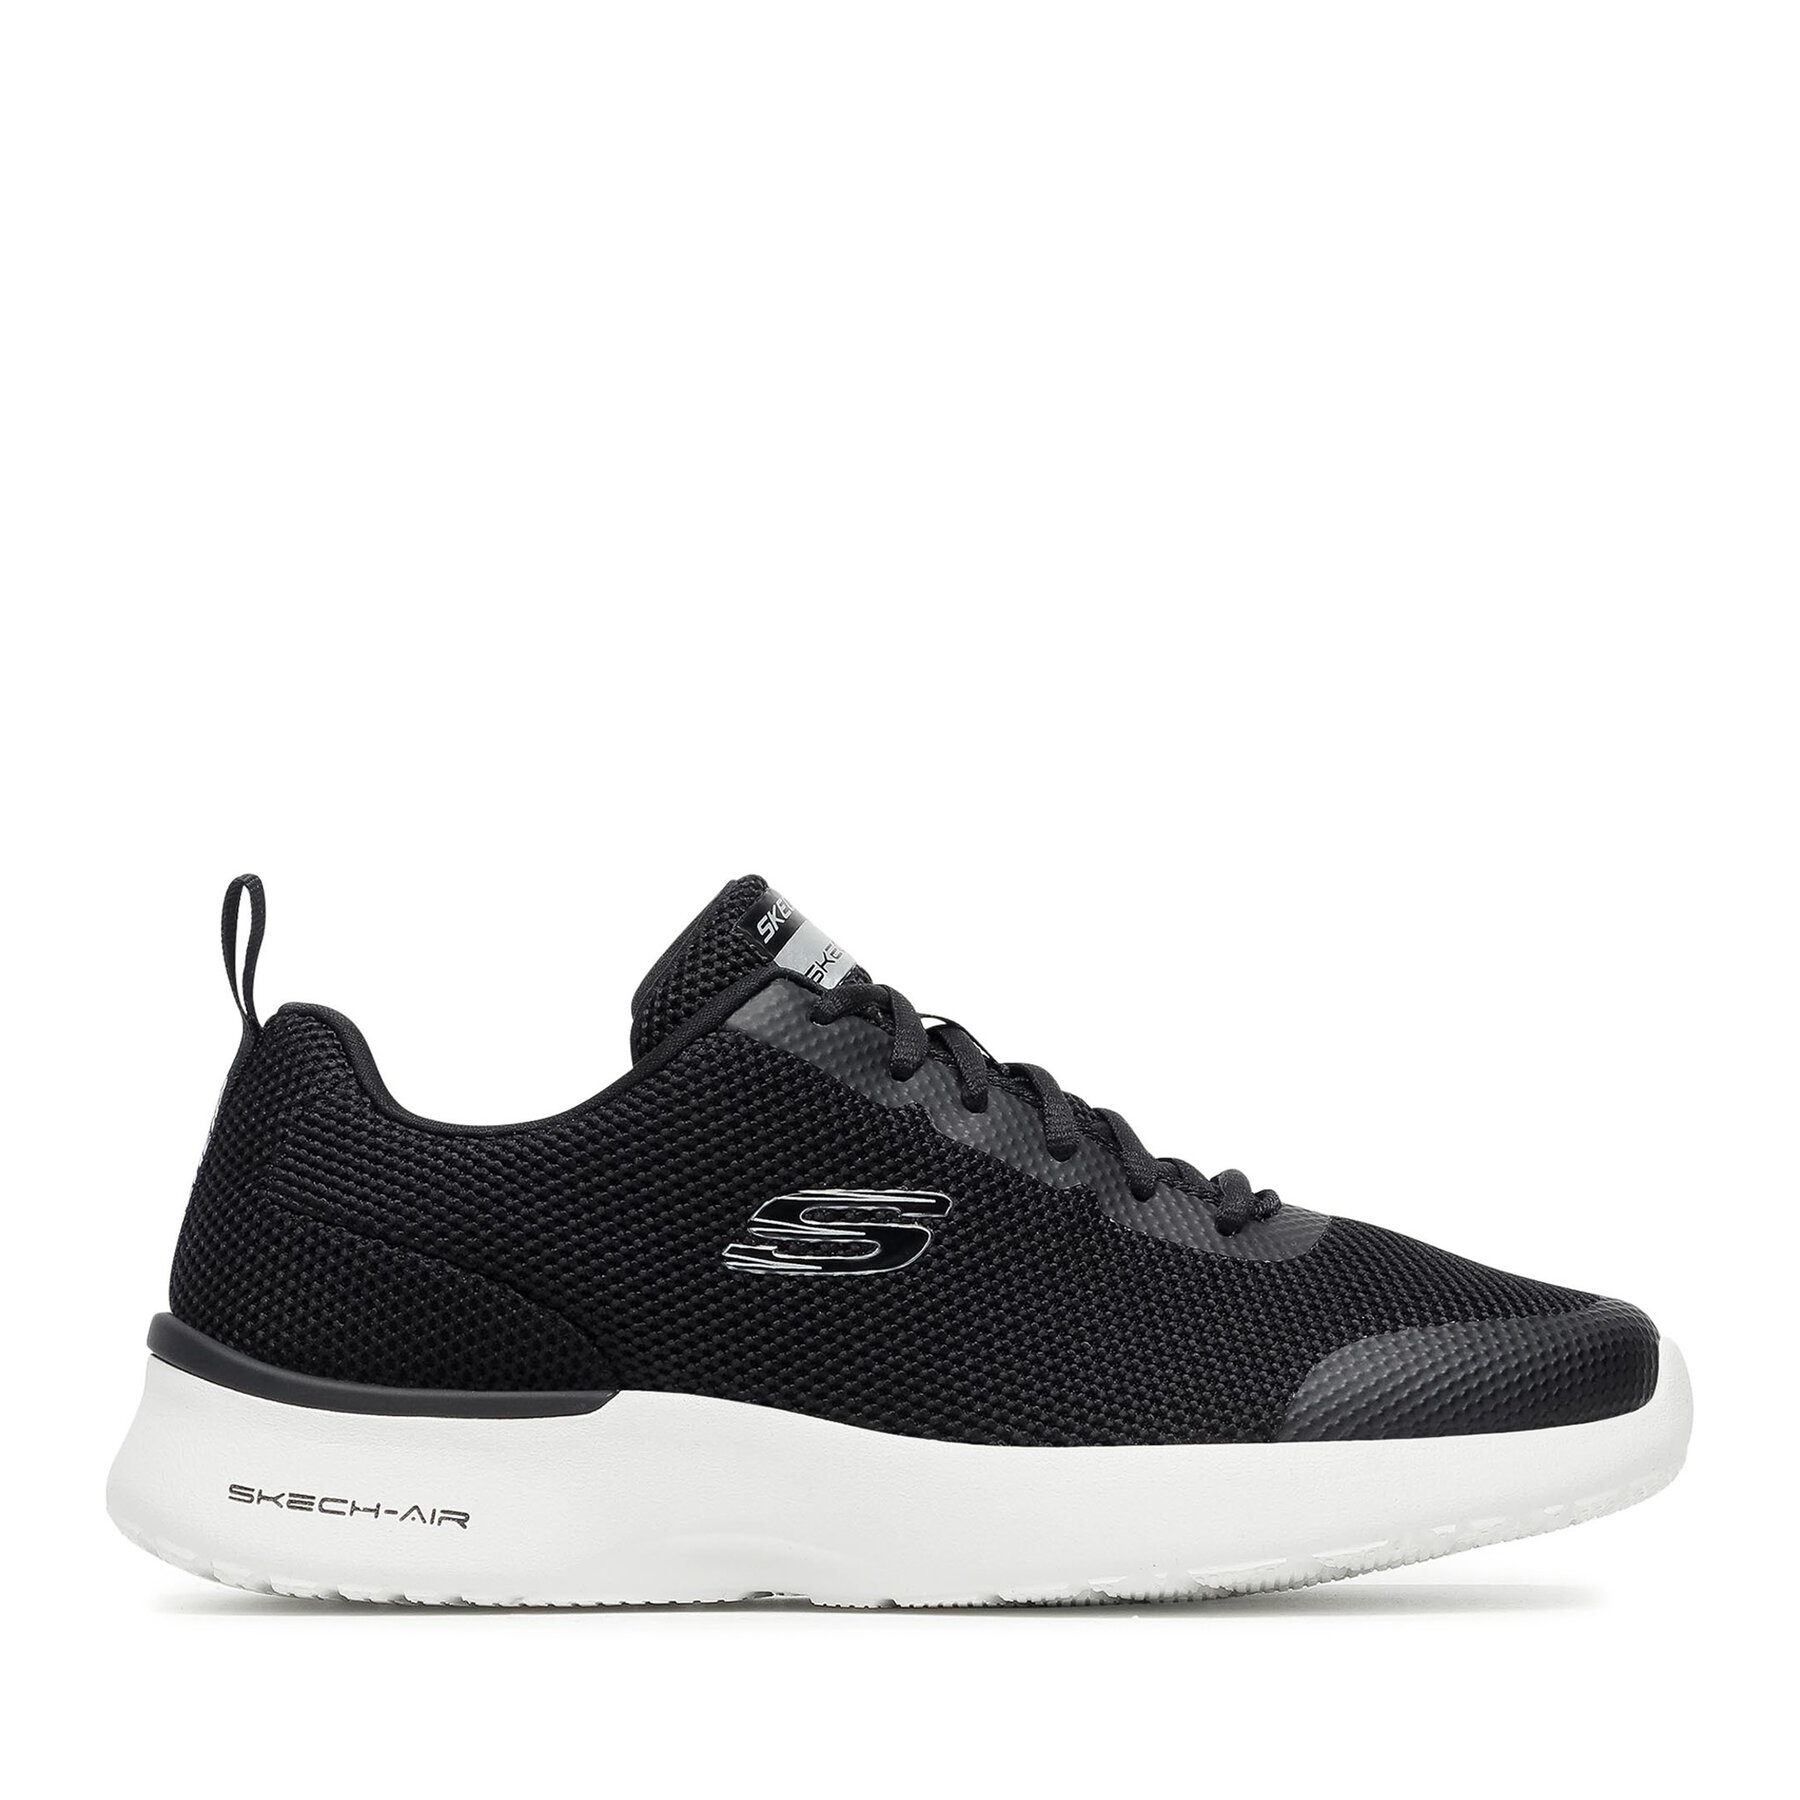 Skechers Skech-Air Dynamight Winly black/white